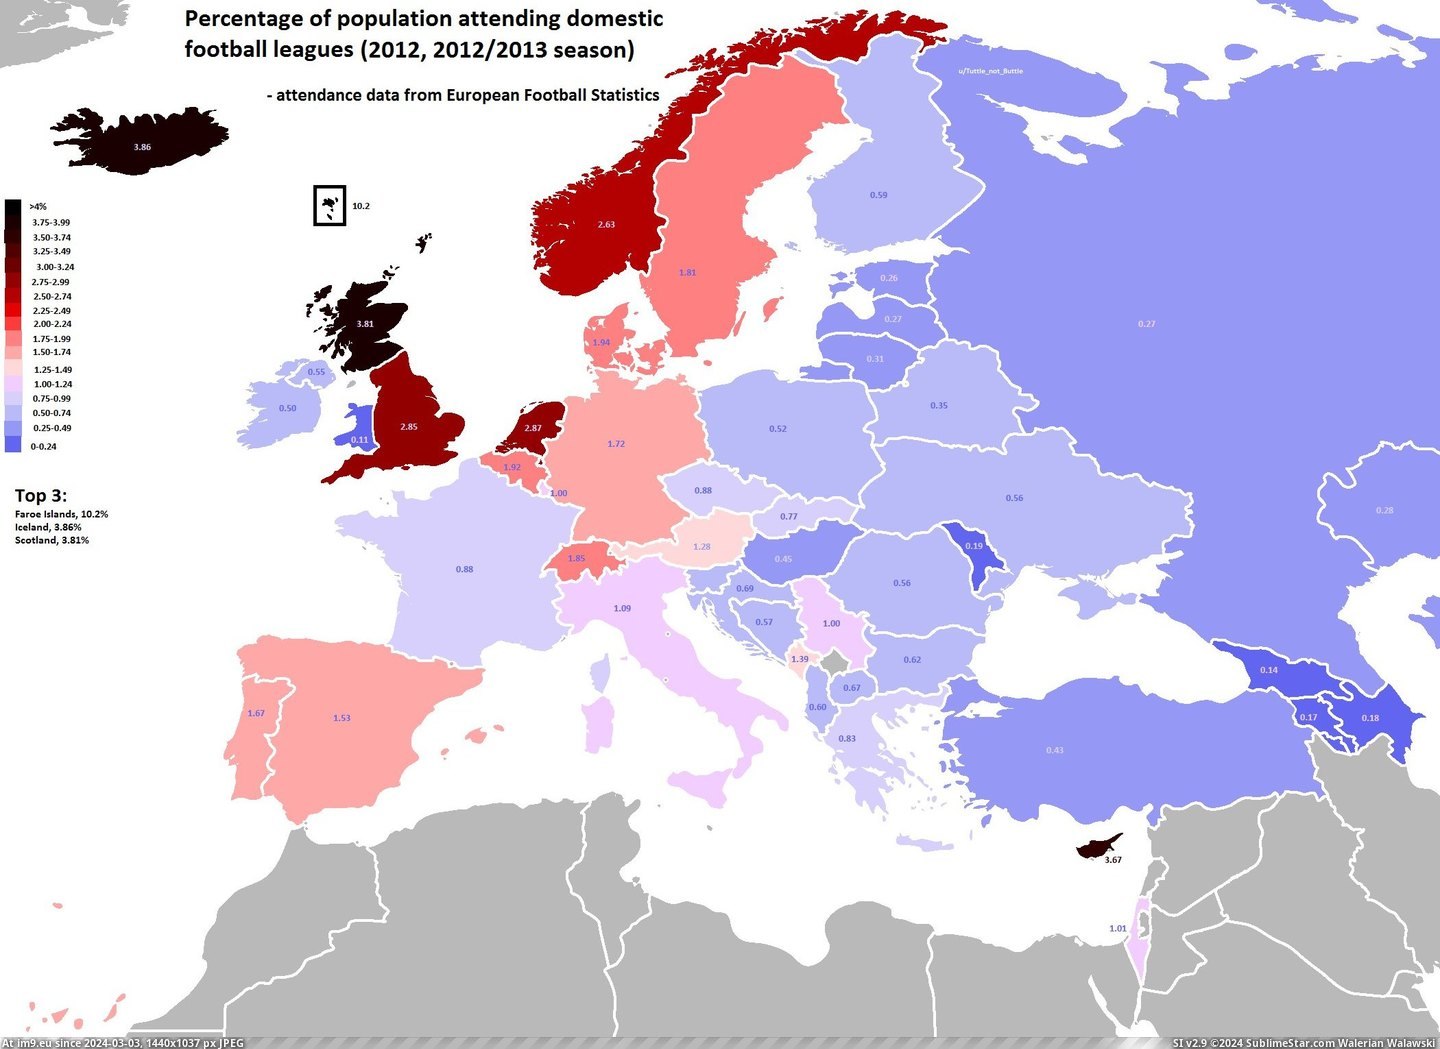 #Europe #Population #Football #2100x1525 #Domestic #Leagues #Watching #Percentage #Soccer [Mapporn] Percentage of population watching domestic football-soccer leagues in Europe. [2100x1525] Pic. (Image of album My r/MAPS favs))